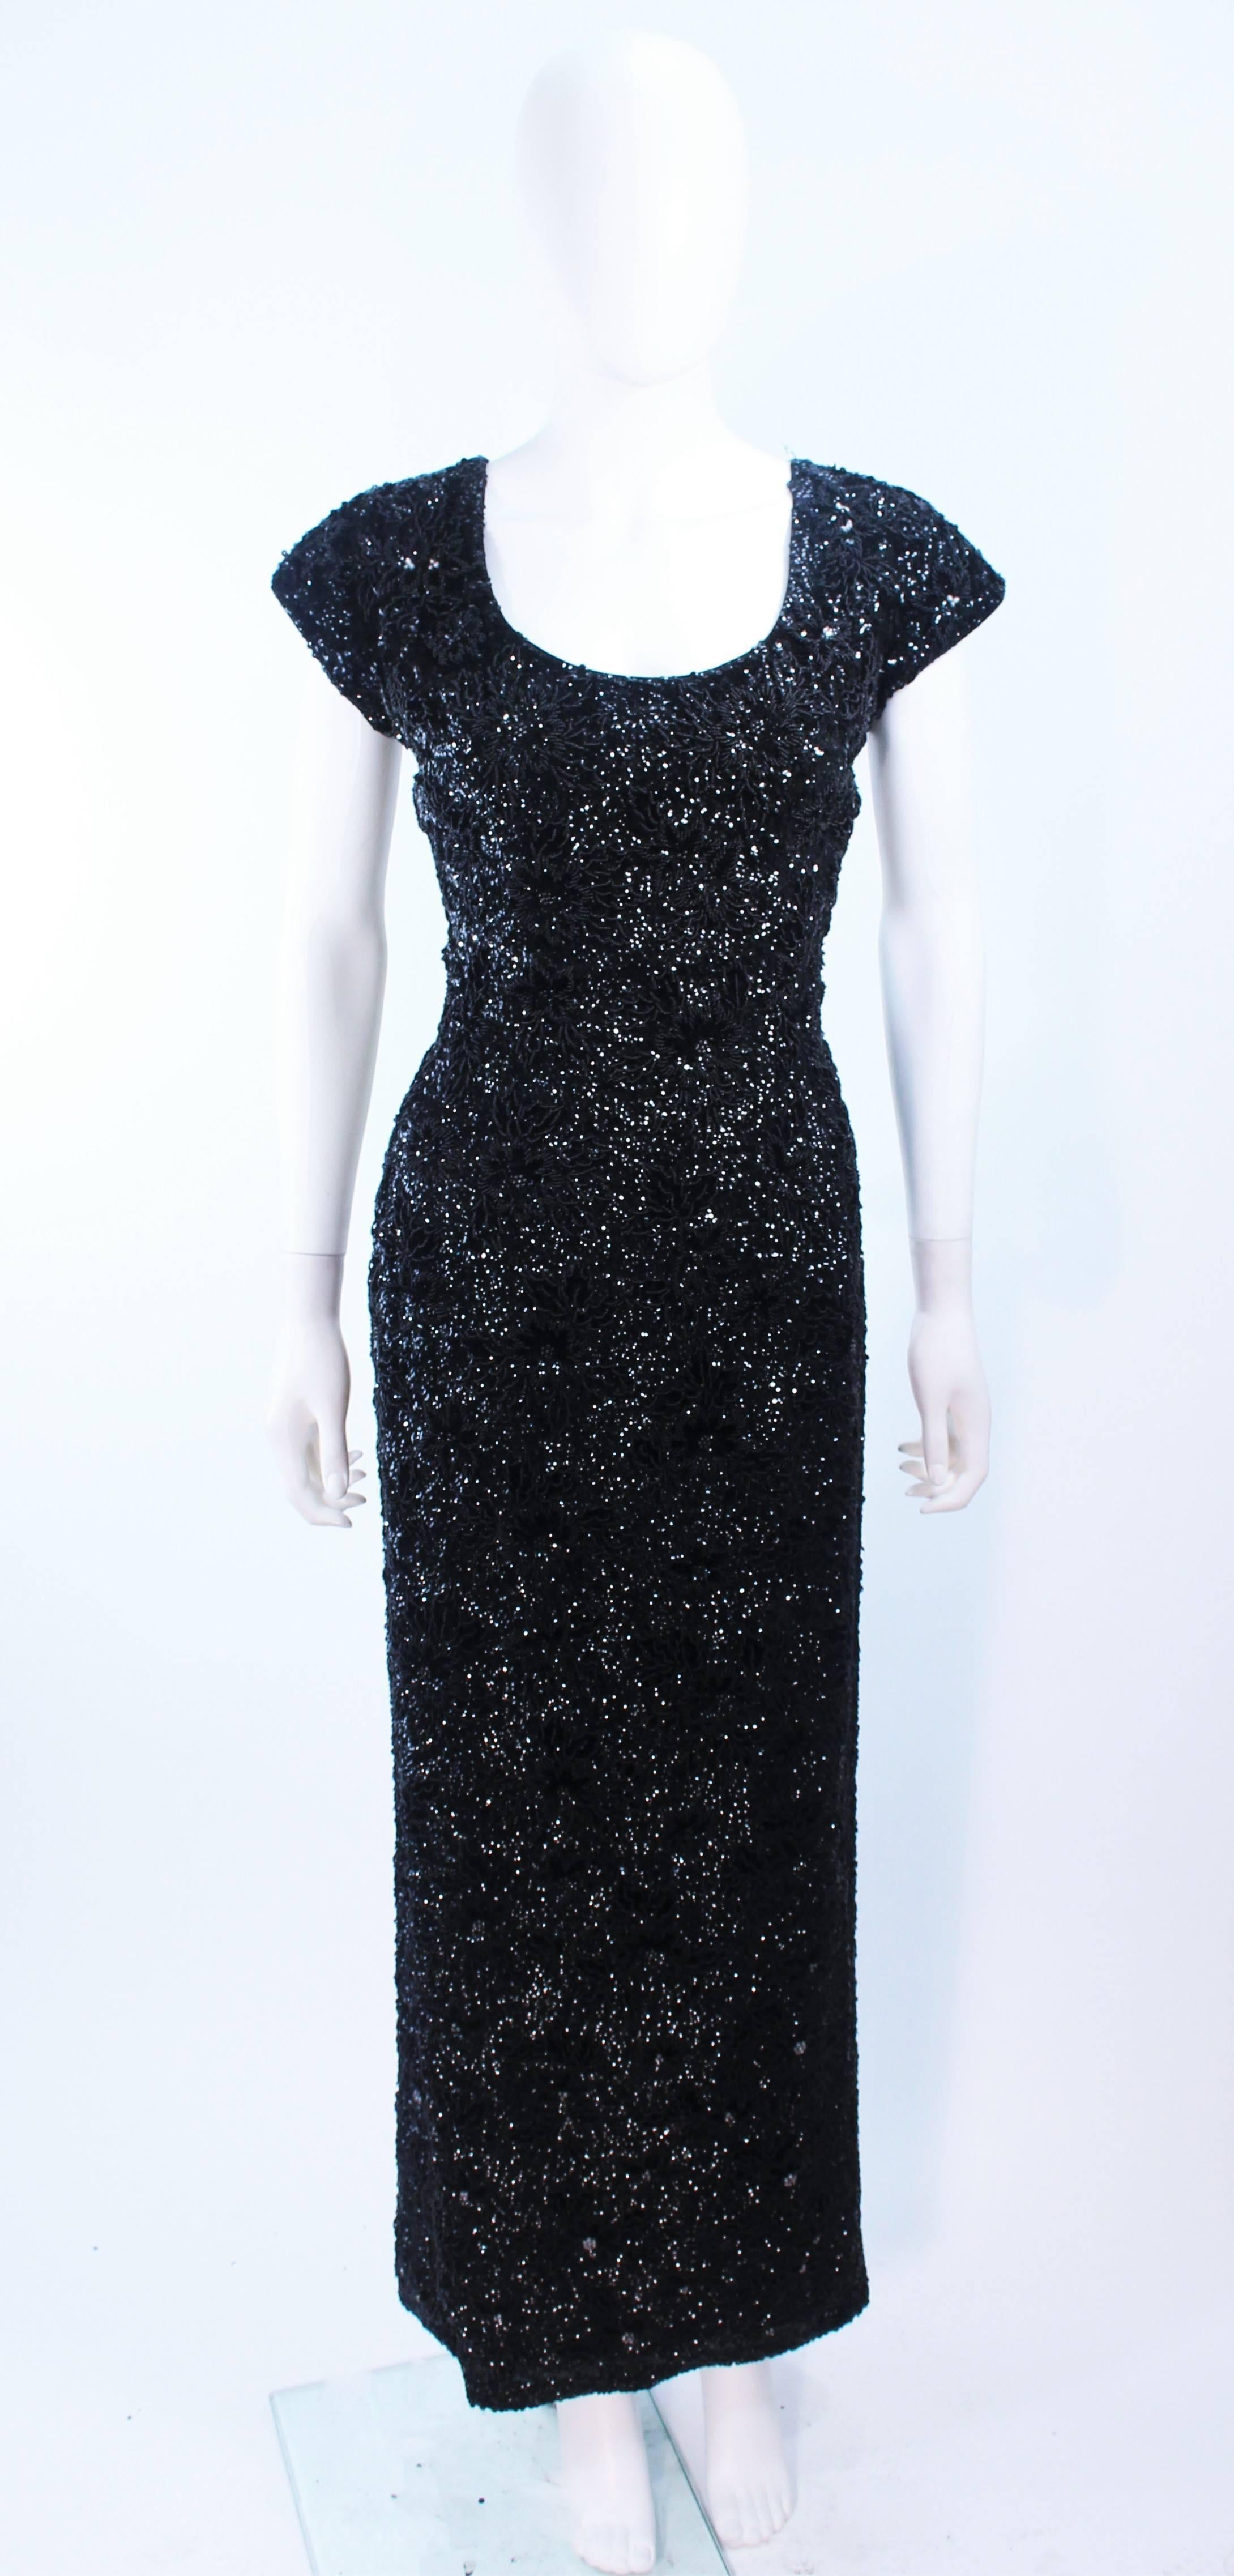 This Super Sexy Bruce Arnold gown is fully hand-beaded and composed of a black sequin on rayon and features a floral detail. There is a center back metal zipper closure. The gown is in excellent condition and truly is a show-stopper.

**Please